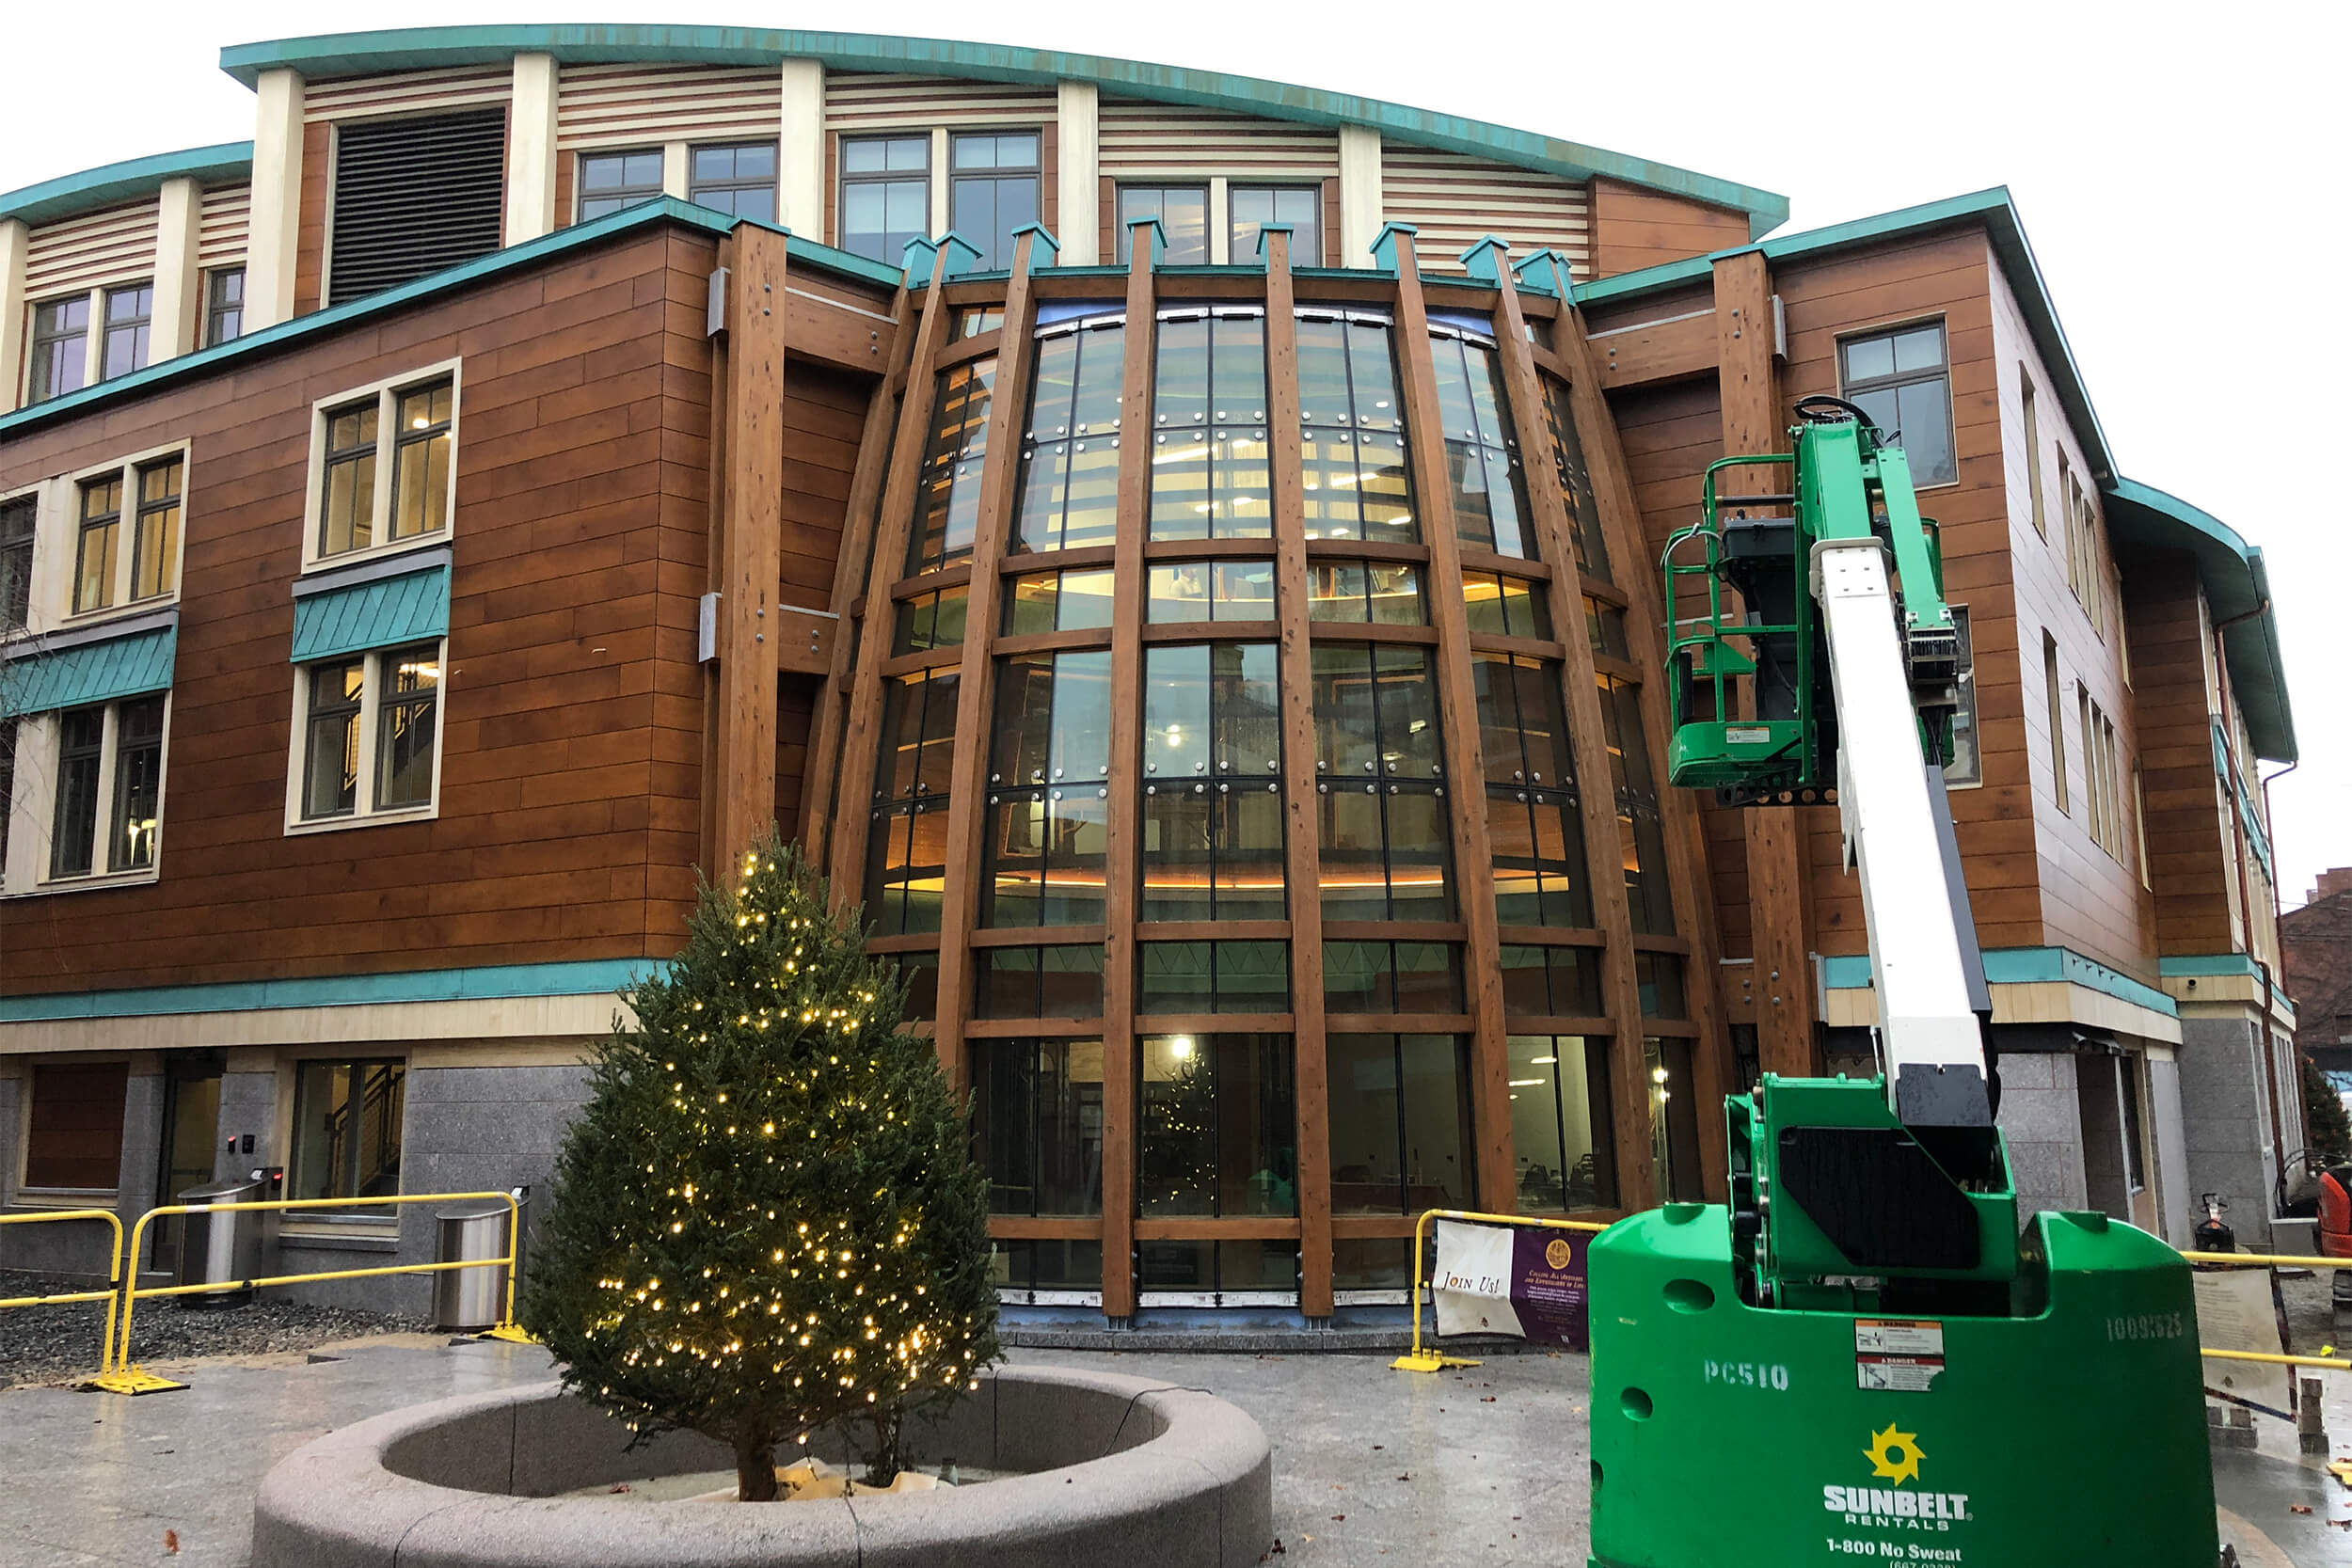 Exterior daytime photo of the facade of a mixed-material (glass, wood, brick) building. In front of the building is a Christmas tree and a crane.